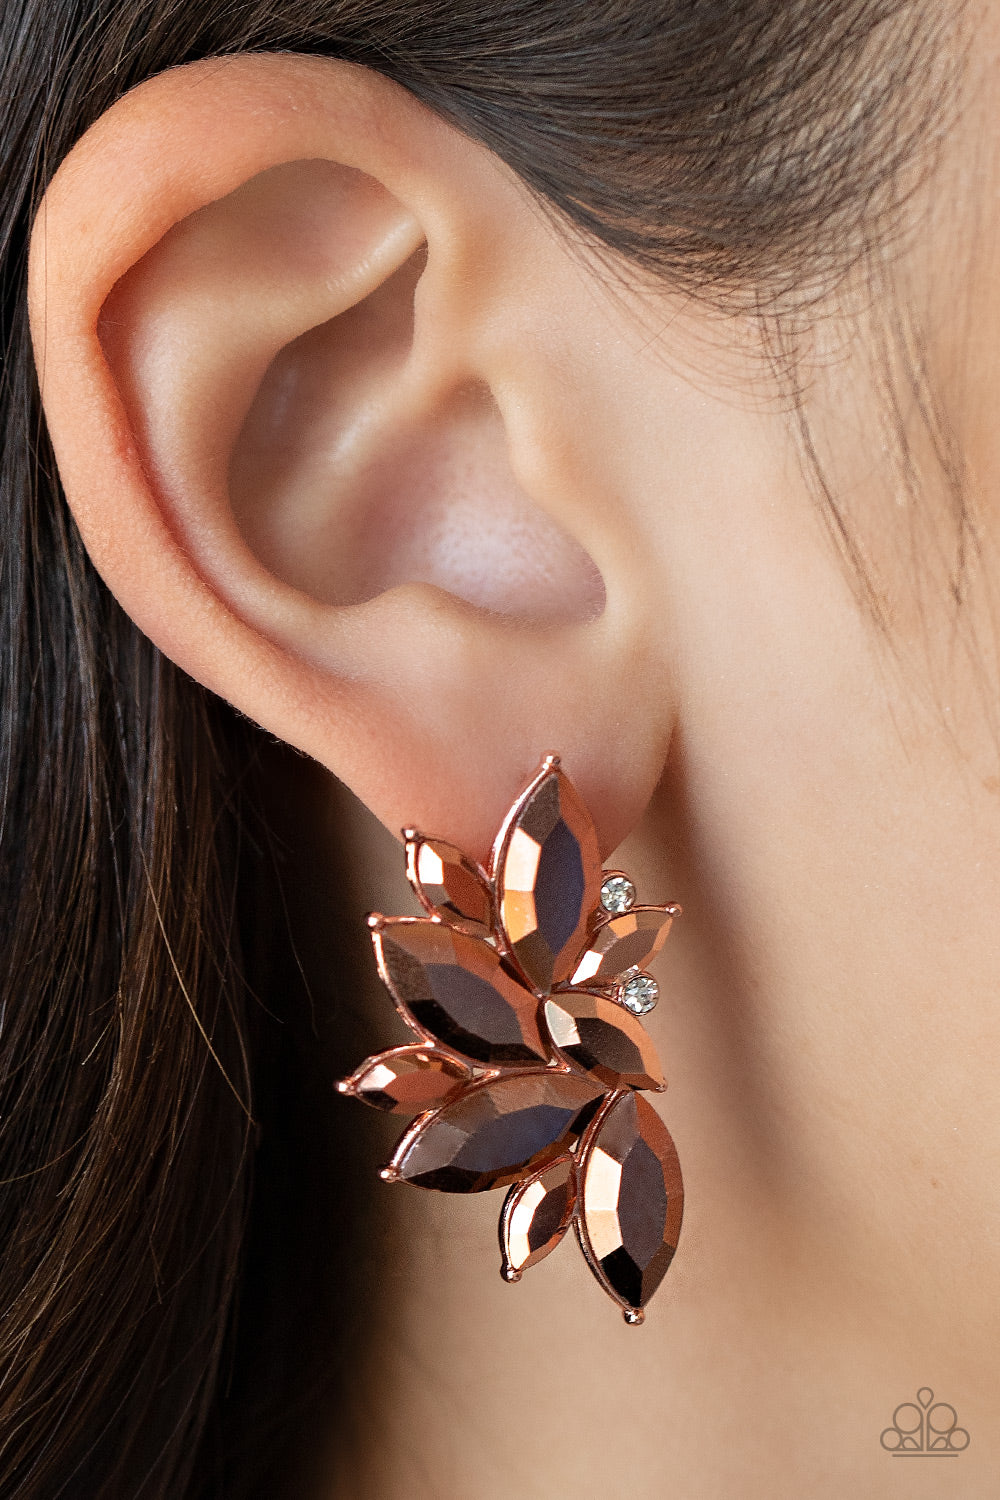 Instant Iridescence ♥ Copper Earrings ♥ Paparazzi Accessories - GlaMarous Titi Jewels